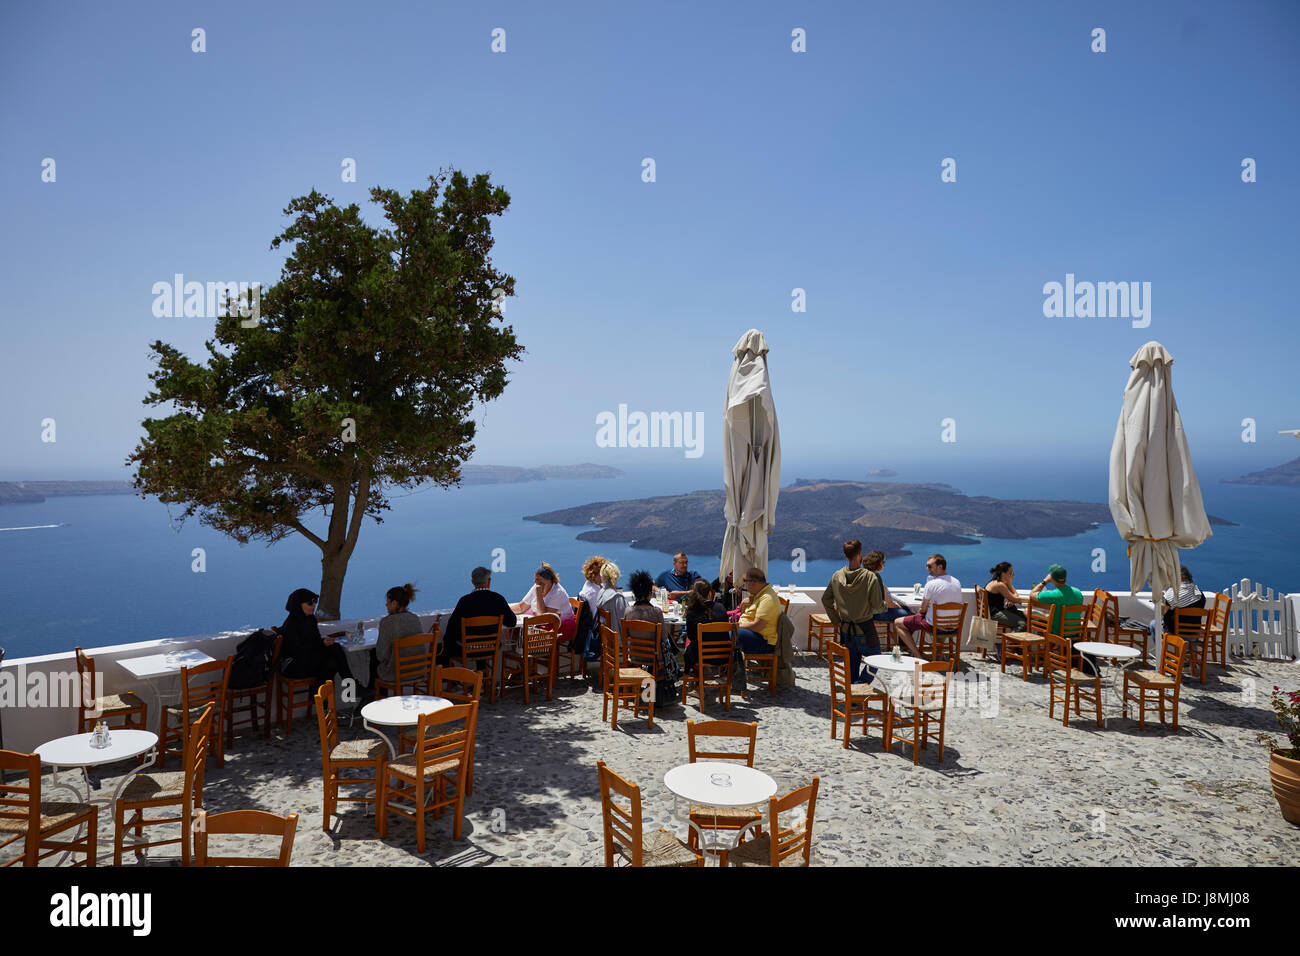 Volcanic Greek island Santorini one of the Cyclades islands in the Aegean Sea. Fira the islands capital restaurant terrace with a great view Stock Photo